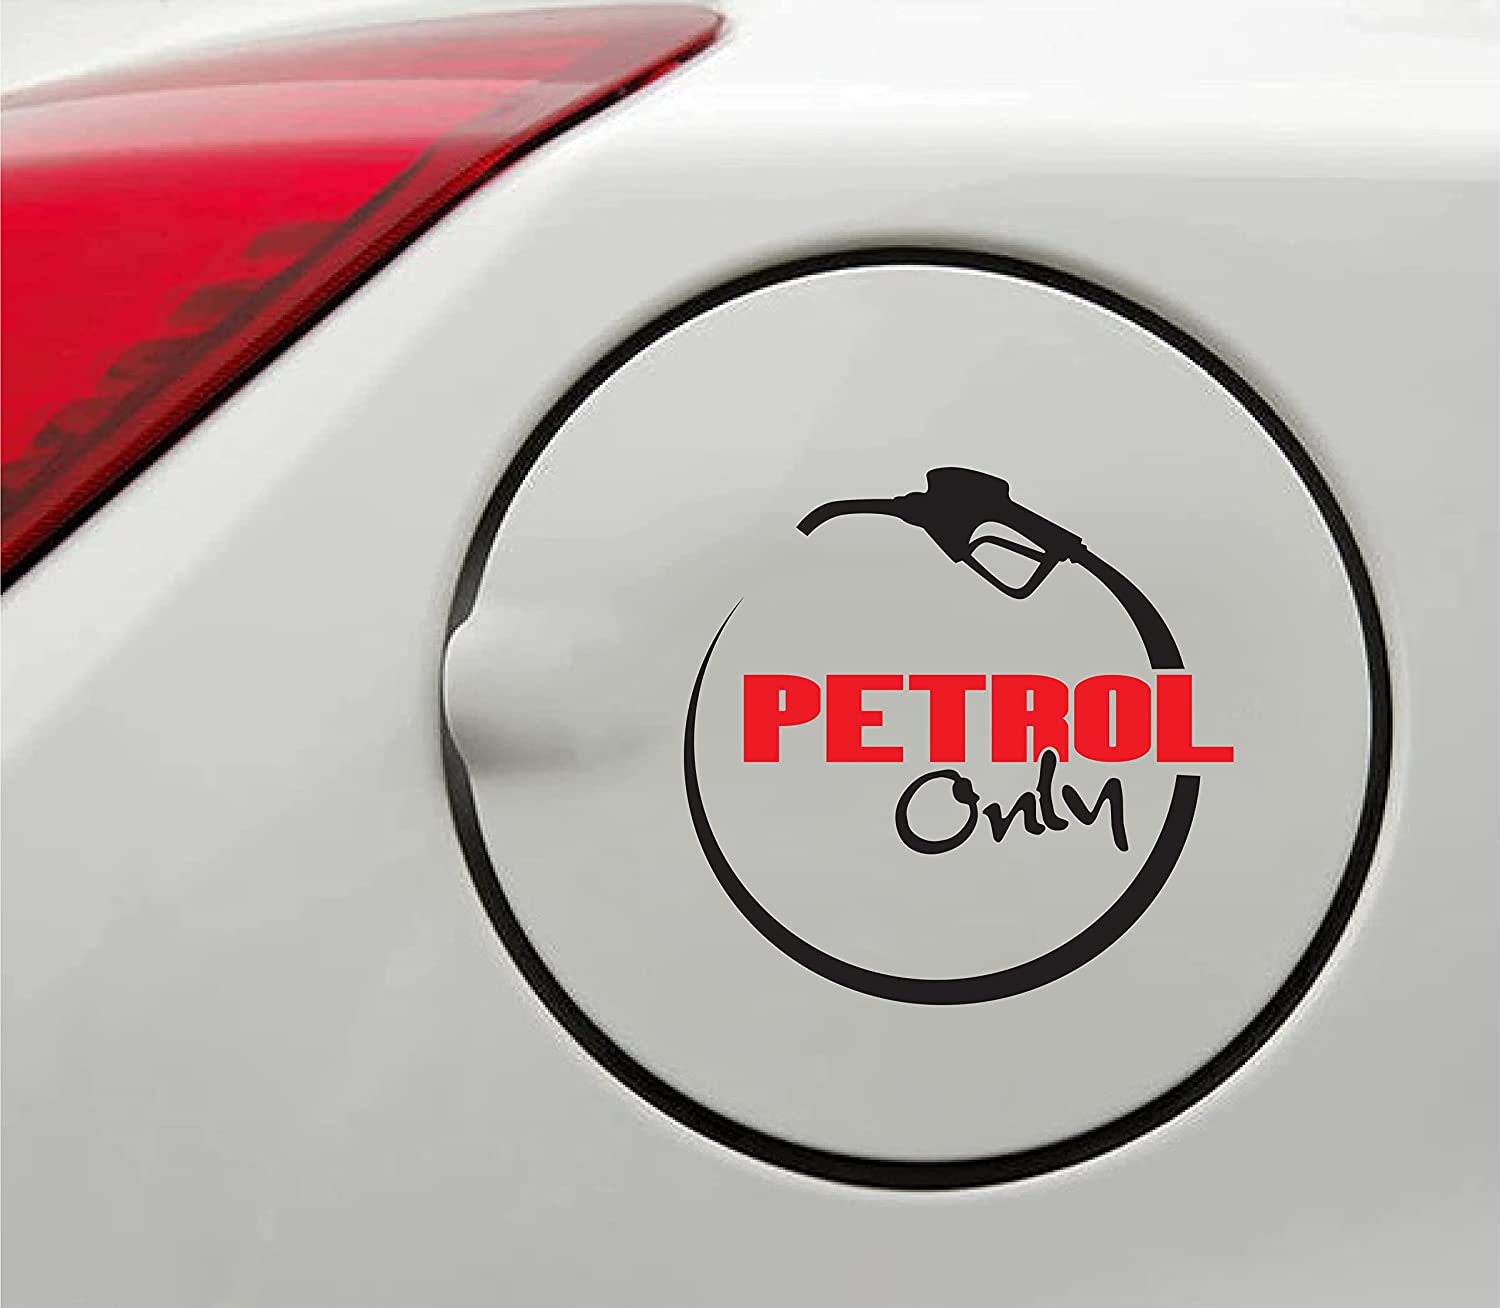 A108 Petrol Sticker for Car Fuel Lid Talking Petrol White and Red Decals L  x H 9 X 7.3 CM WHITE & RED Car Wraps, Decals & Stickers